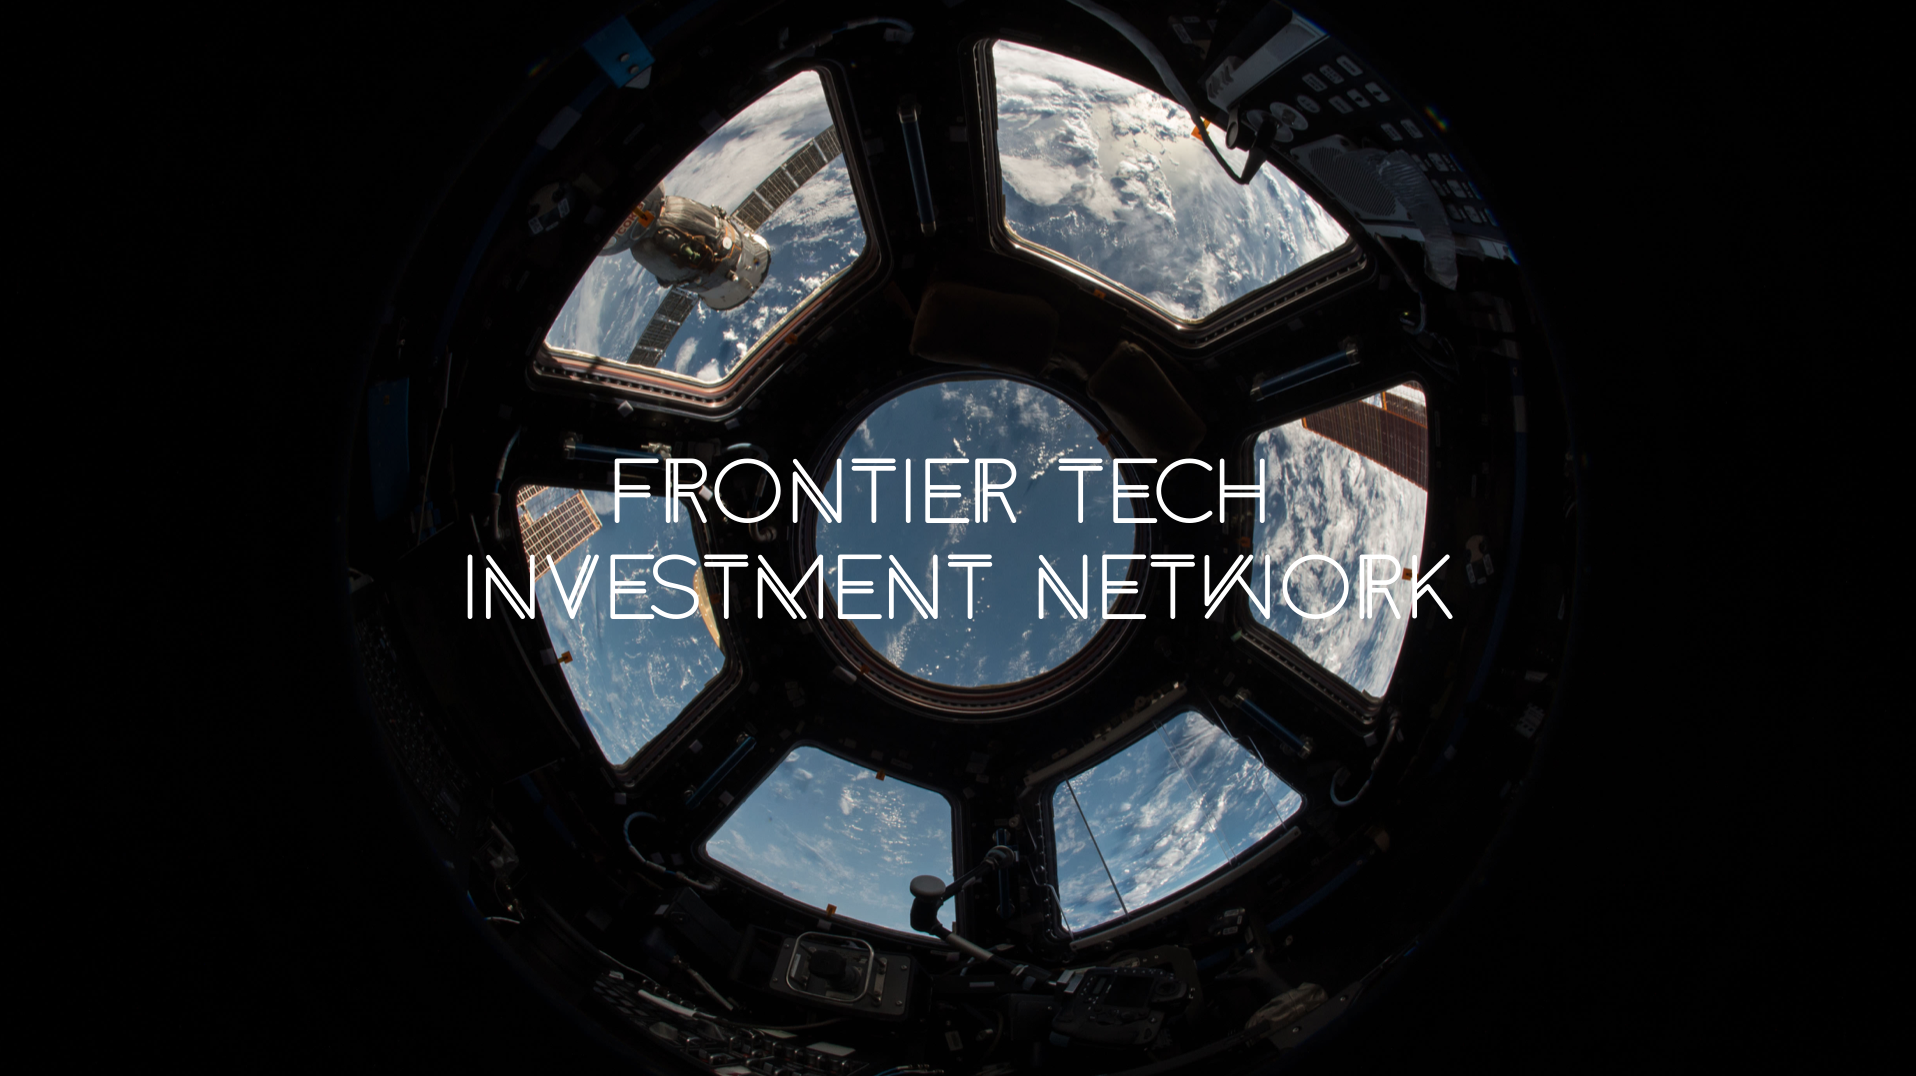 Frontier Tech Investment Network